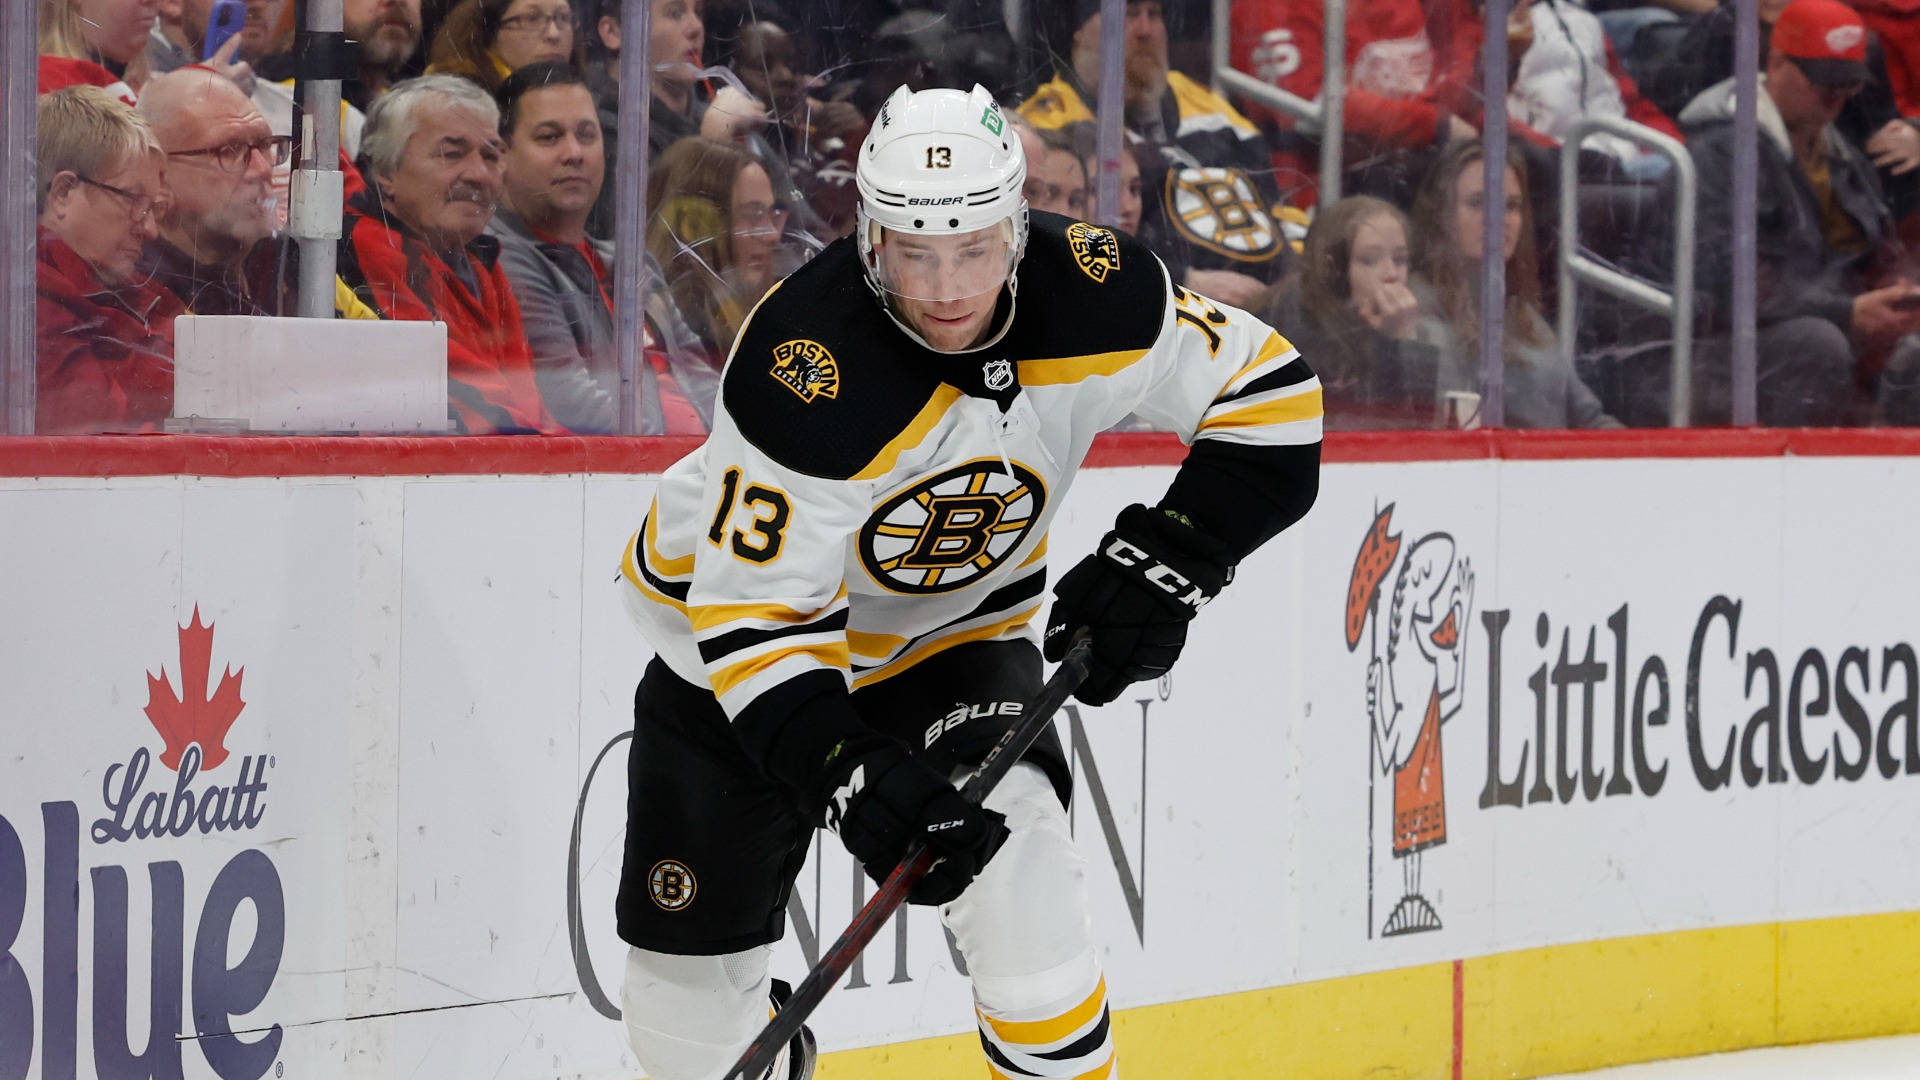 Five things to know about new Bruins forward Charlie Coyle - The